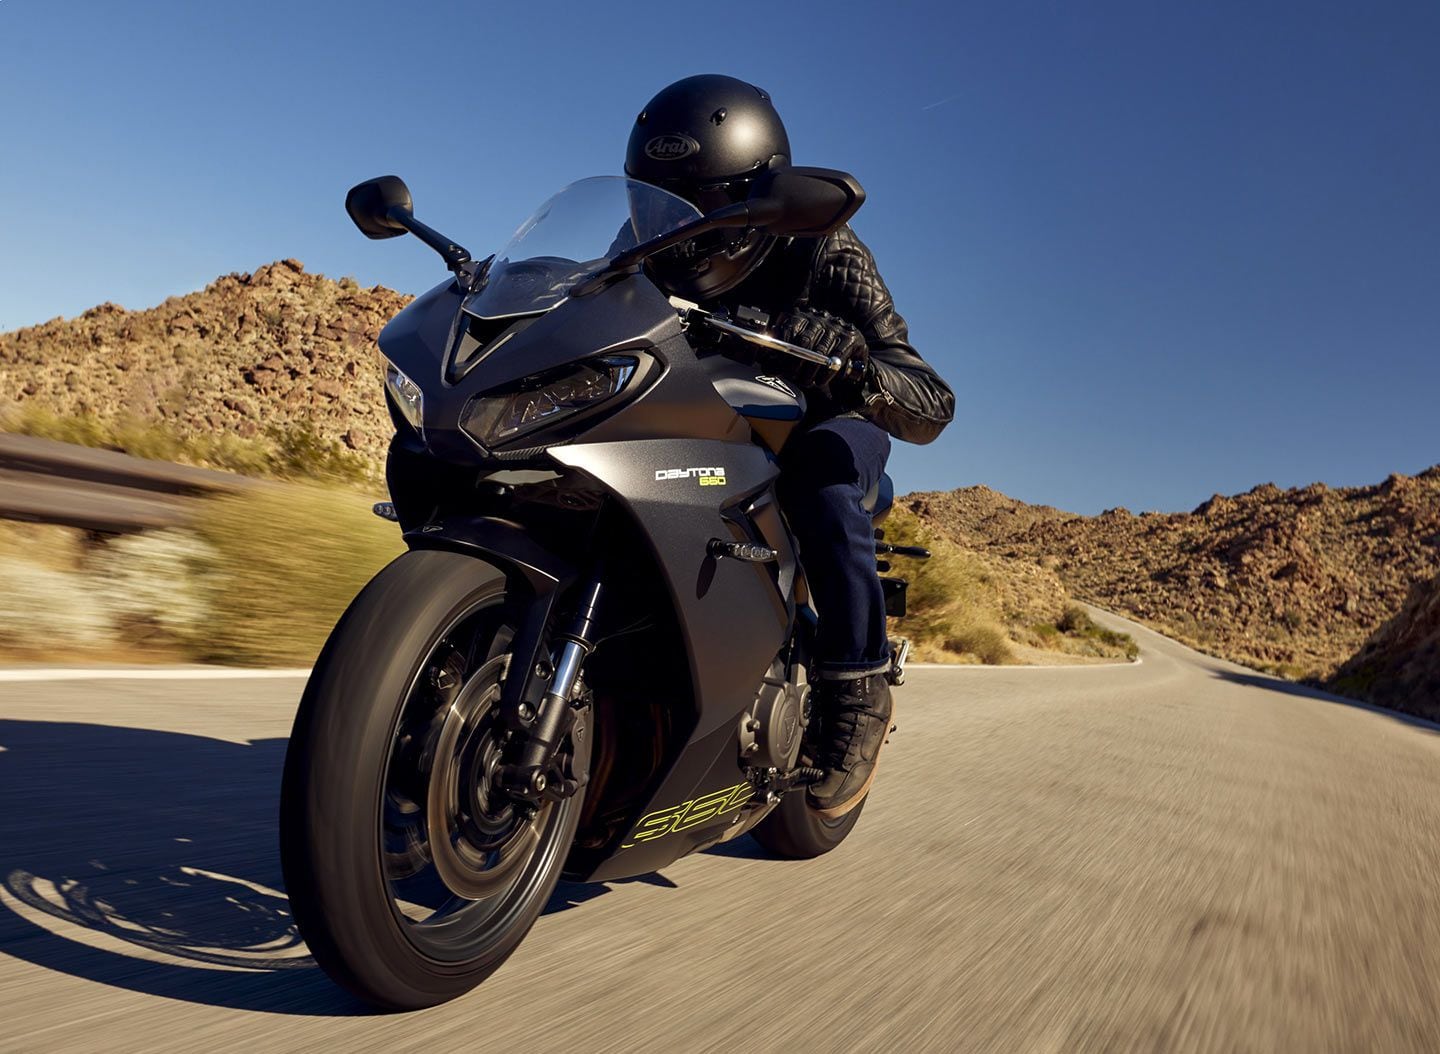 With the addition of the triple-cylinder Daytona 660, the casual middleweight sportbike class is more diverse than ever.